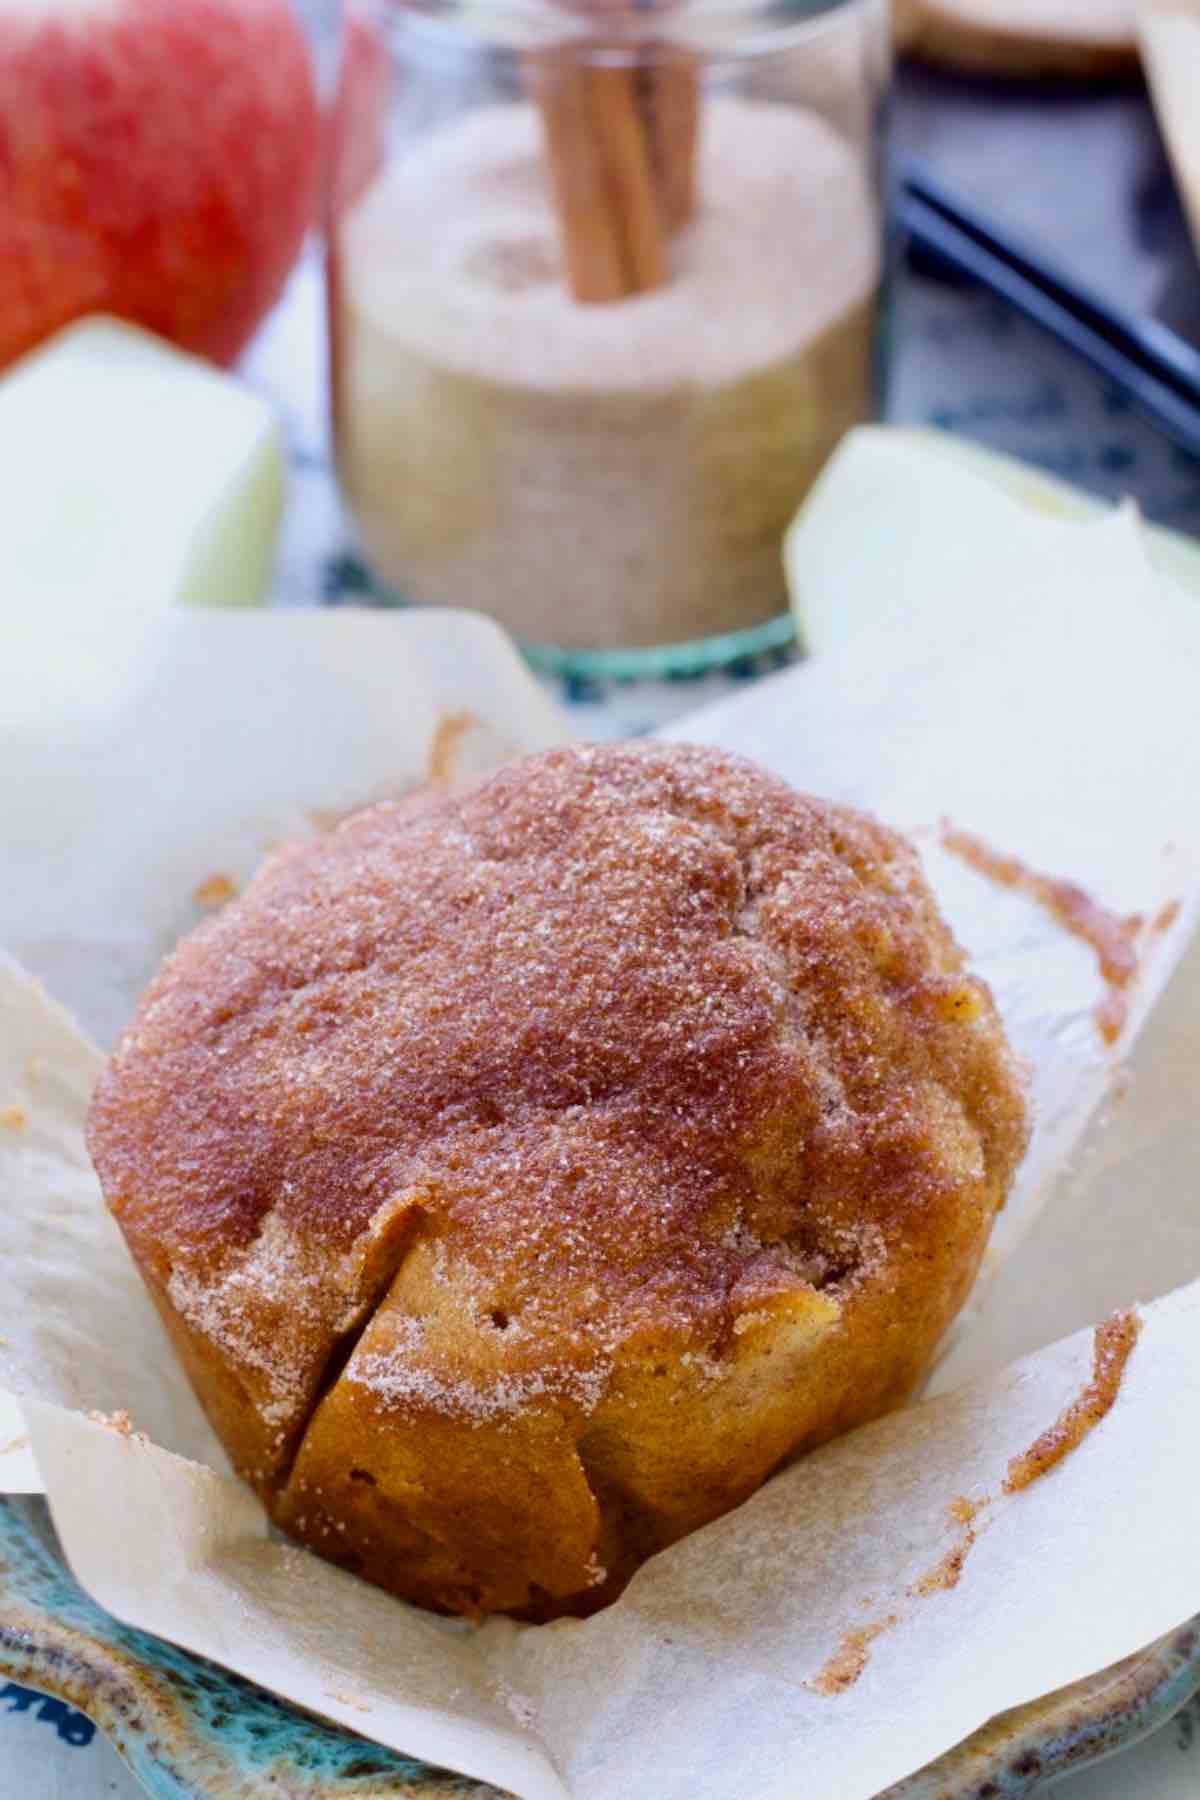 Apple and cinnamon muffin unwrapped.